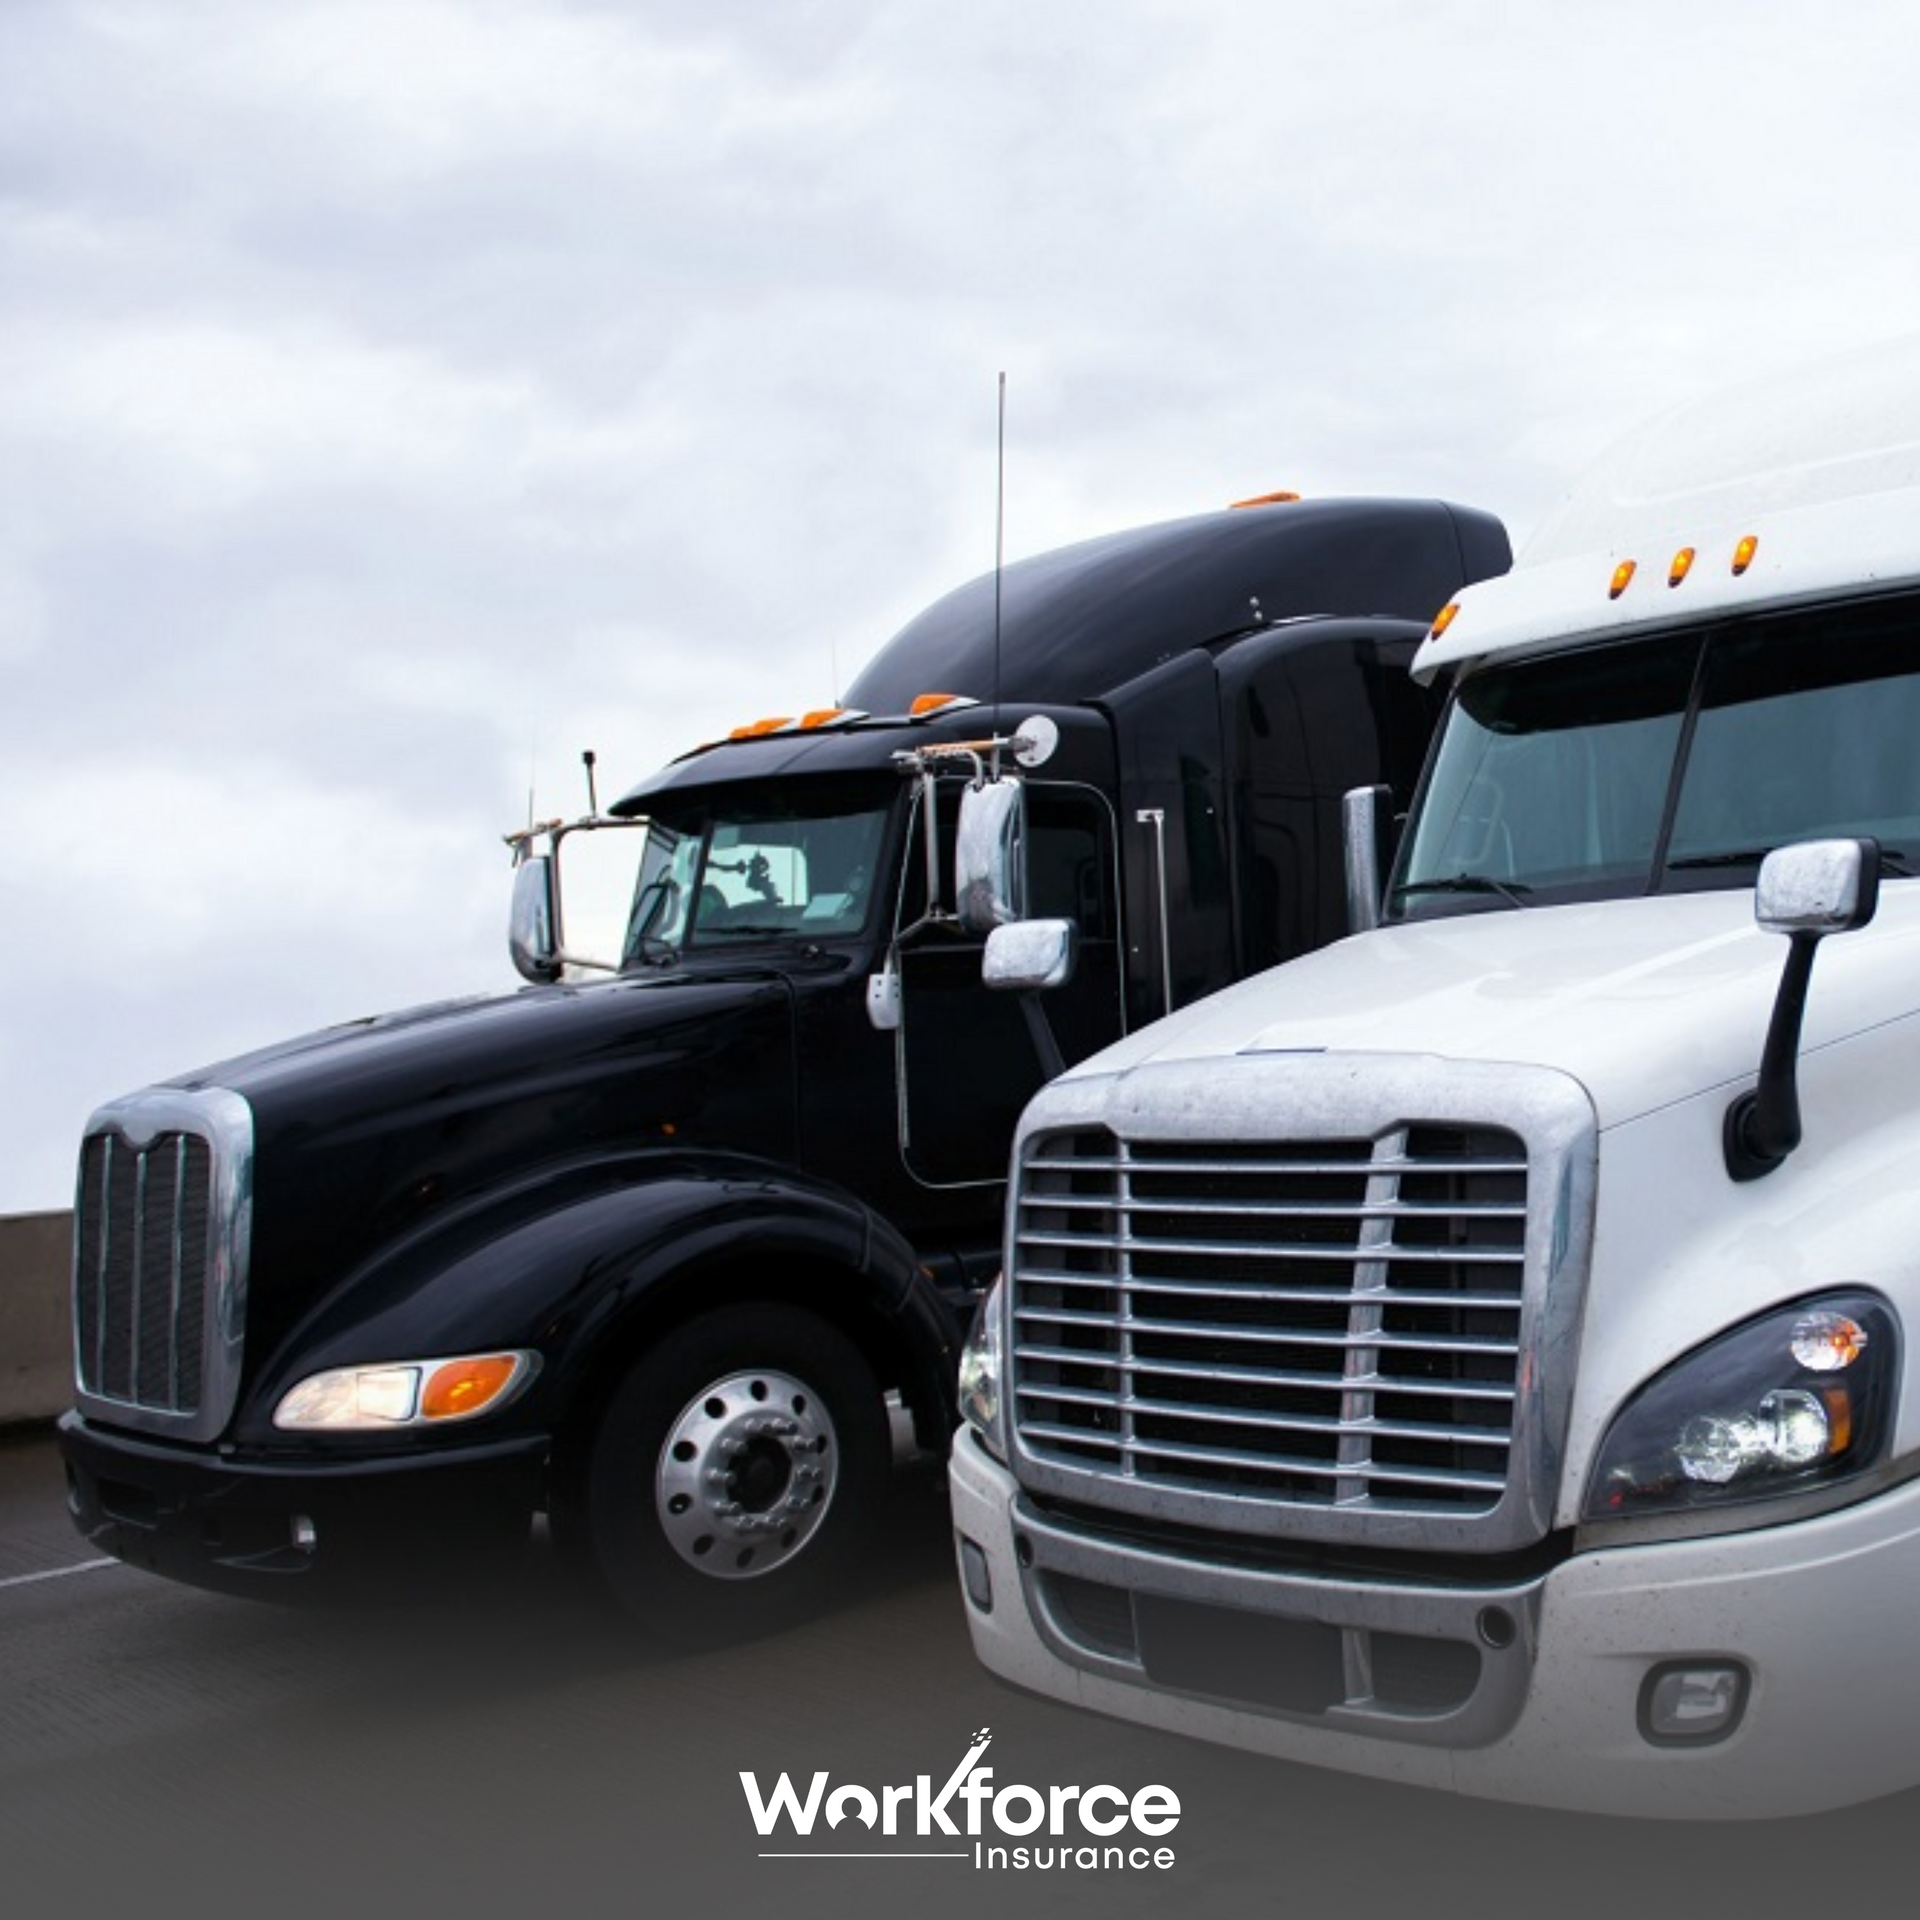 Two trucks driving on the highway represent the challenge of obtaining Workers Compensation coverage.